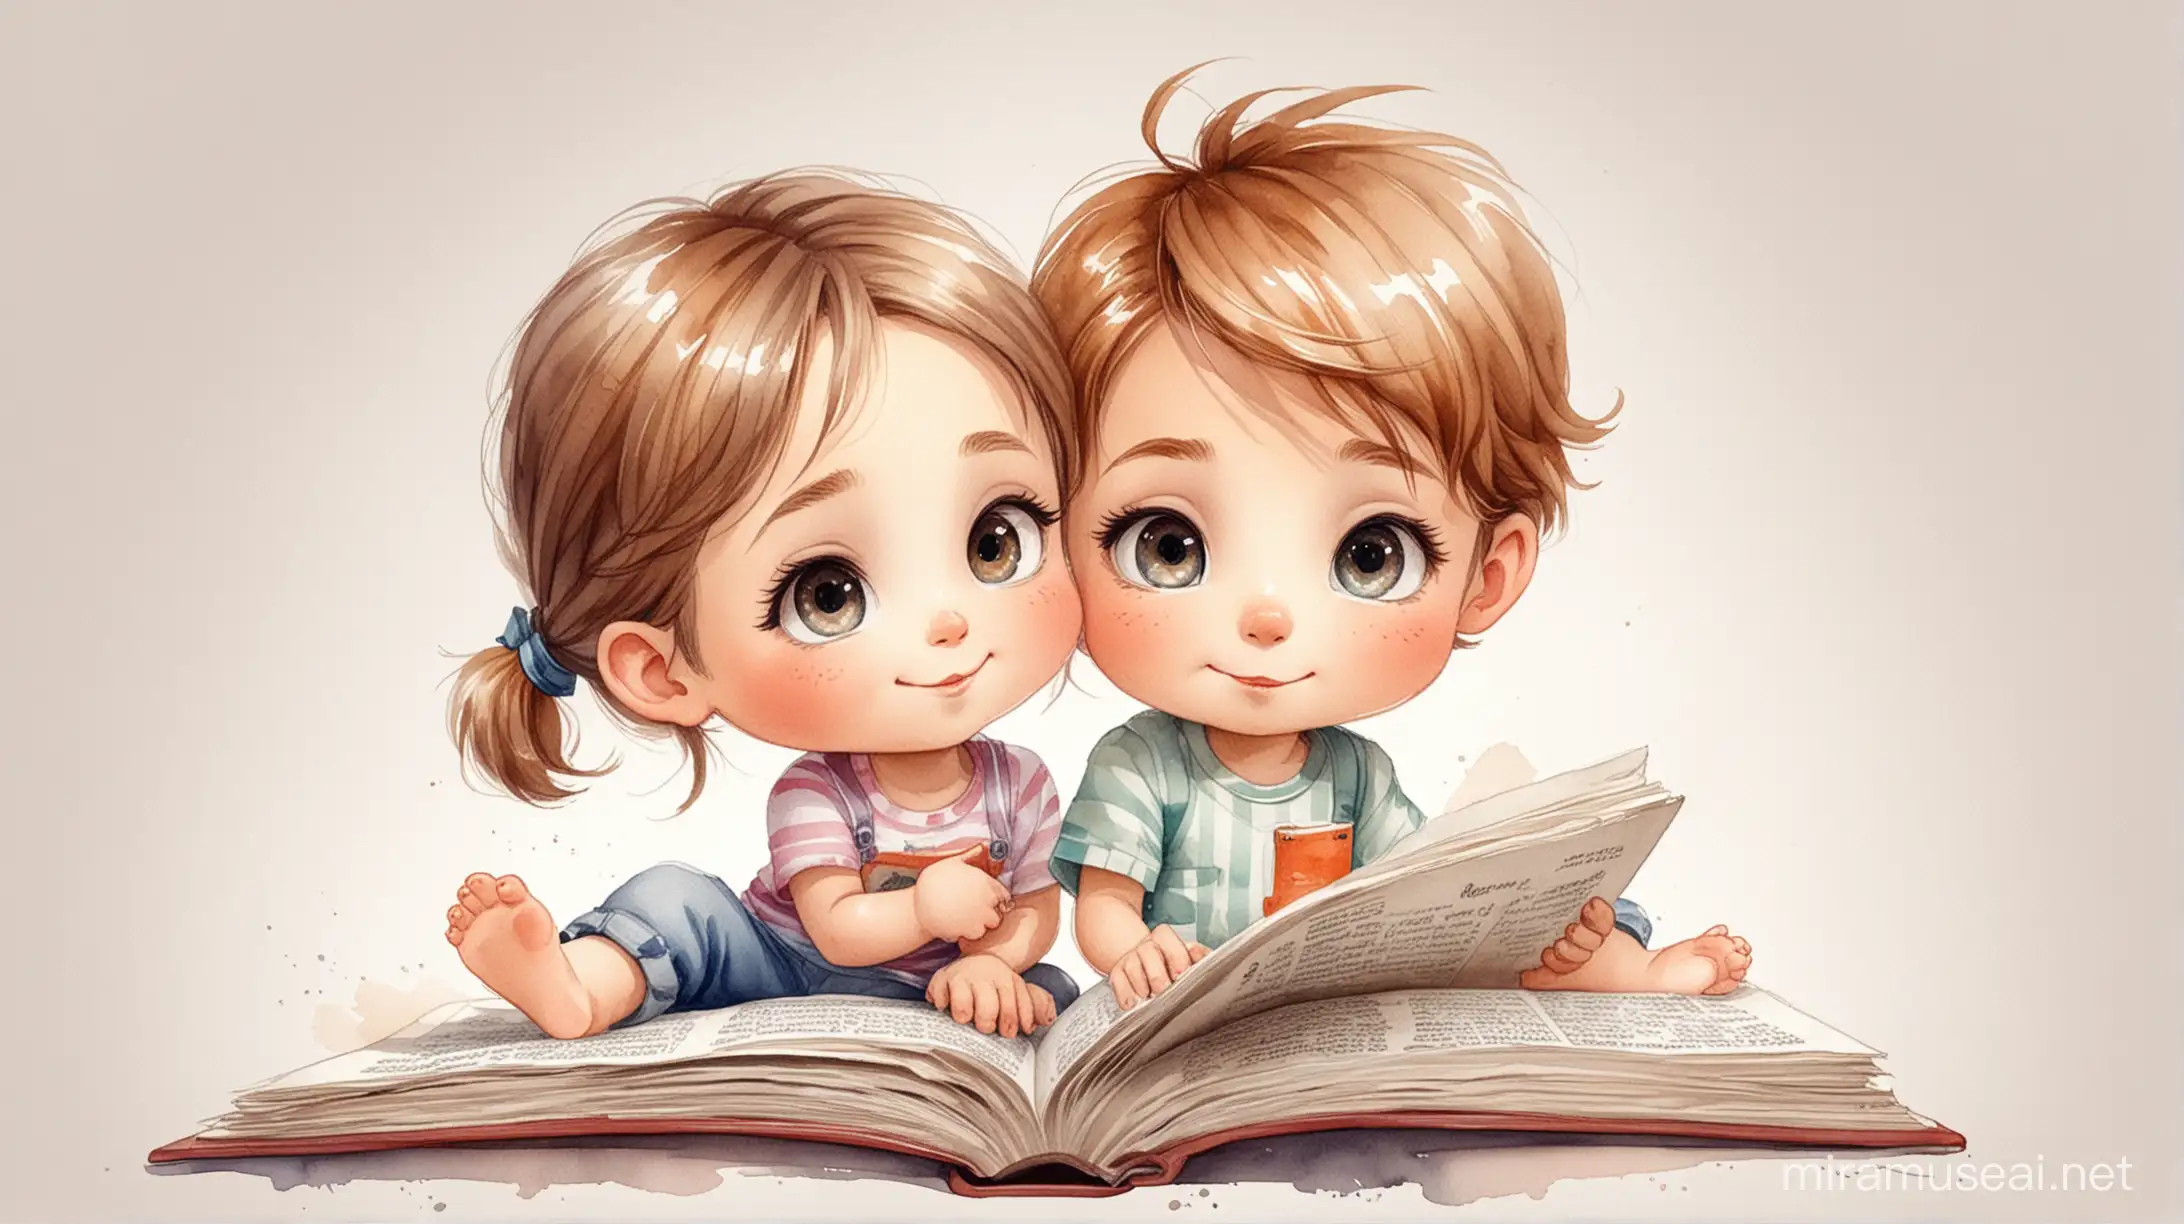 Adorable Chibi Kids Reading Book Whimsical Watercolor Illustration